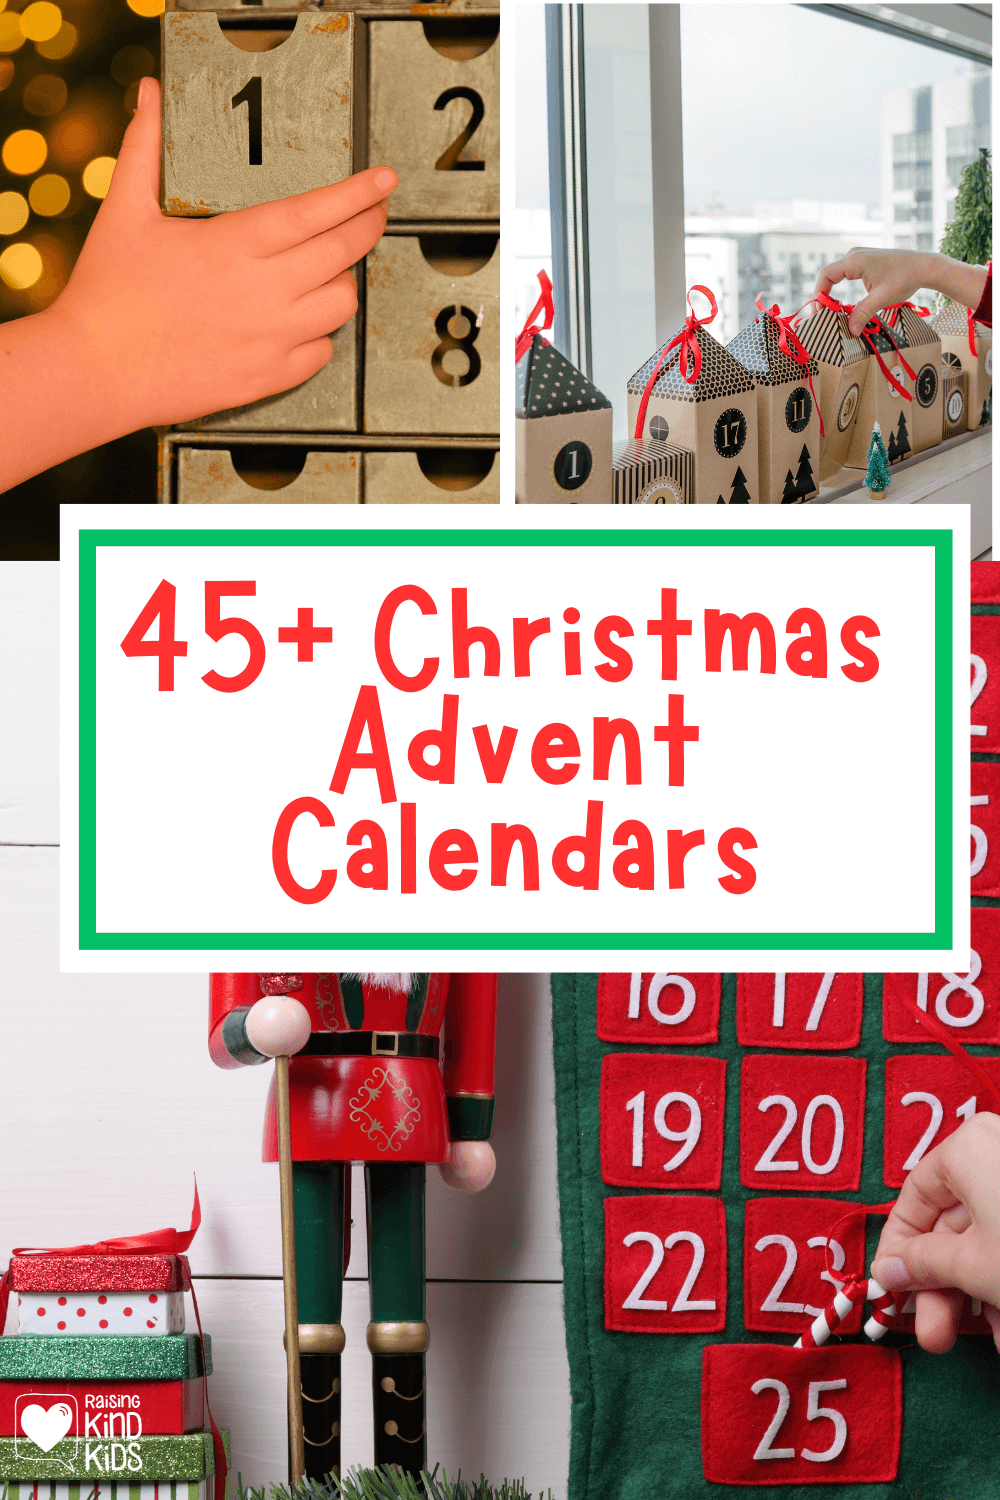 Looking for the best advent calendars to give as gifts for December? These are perfect to countdown the days of December until Christmas. 